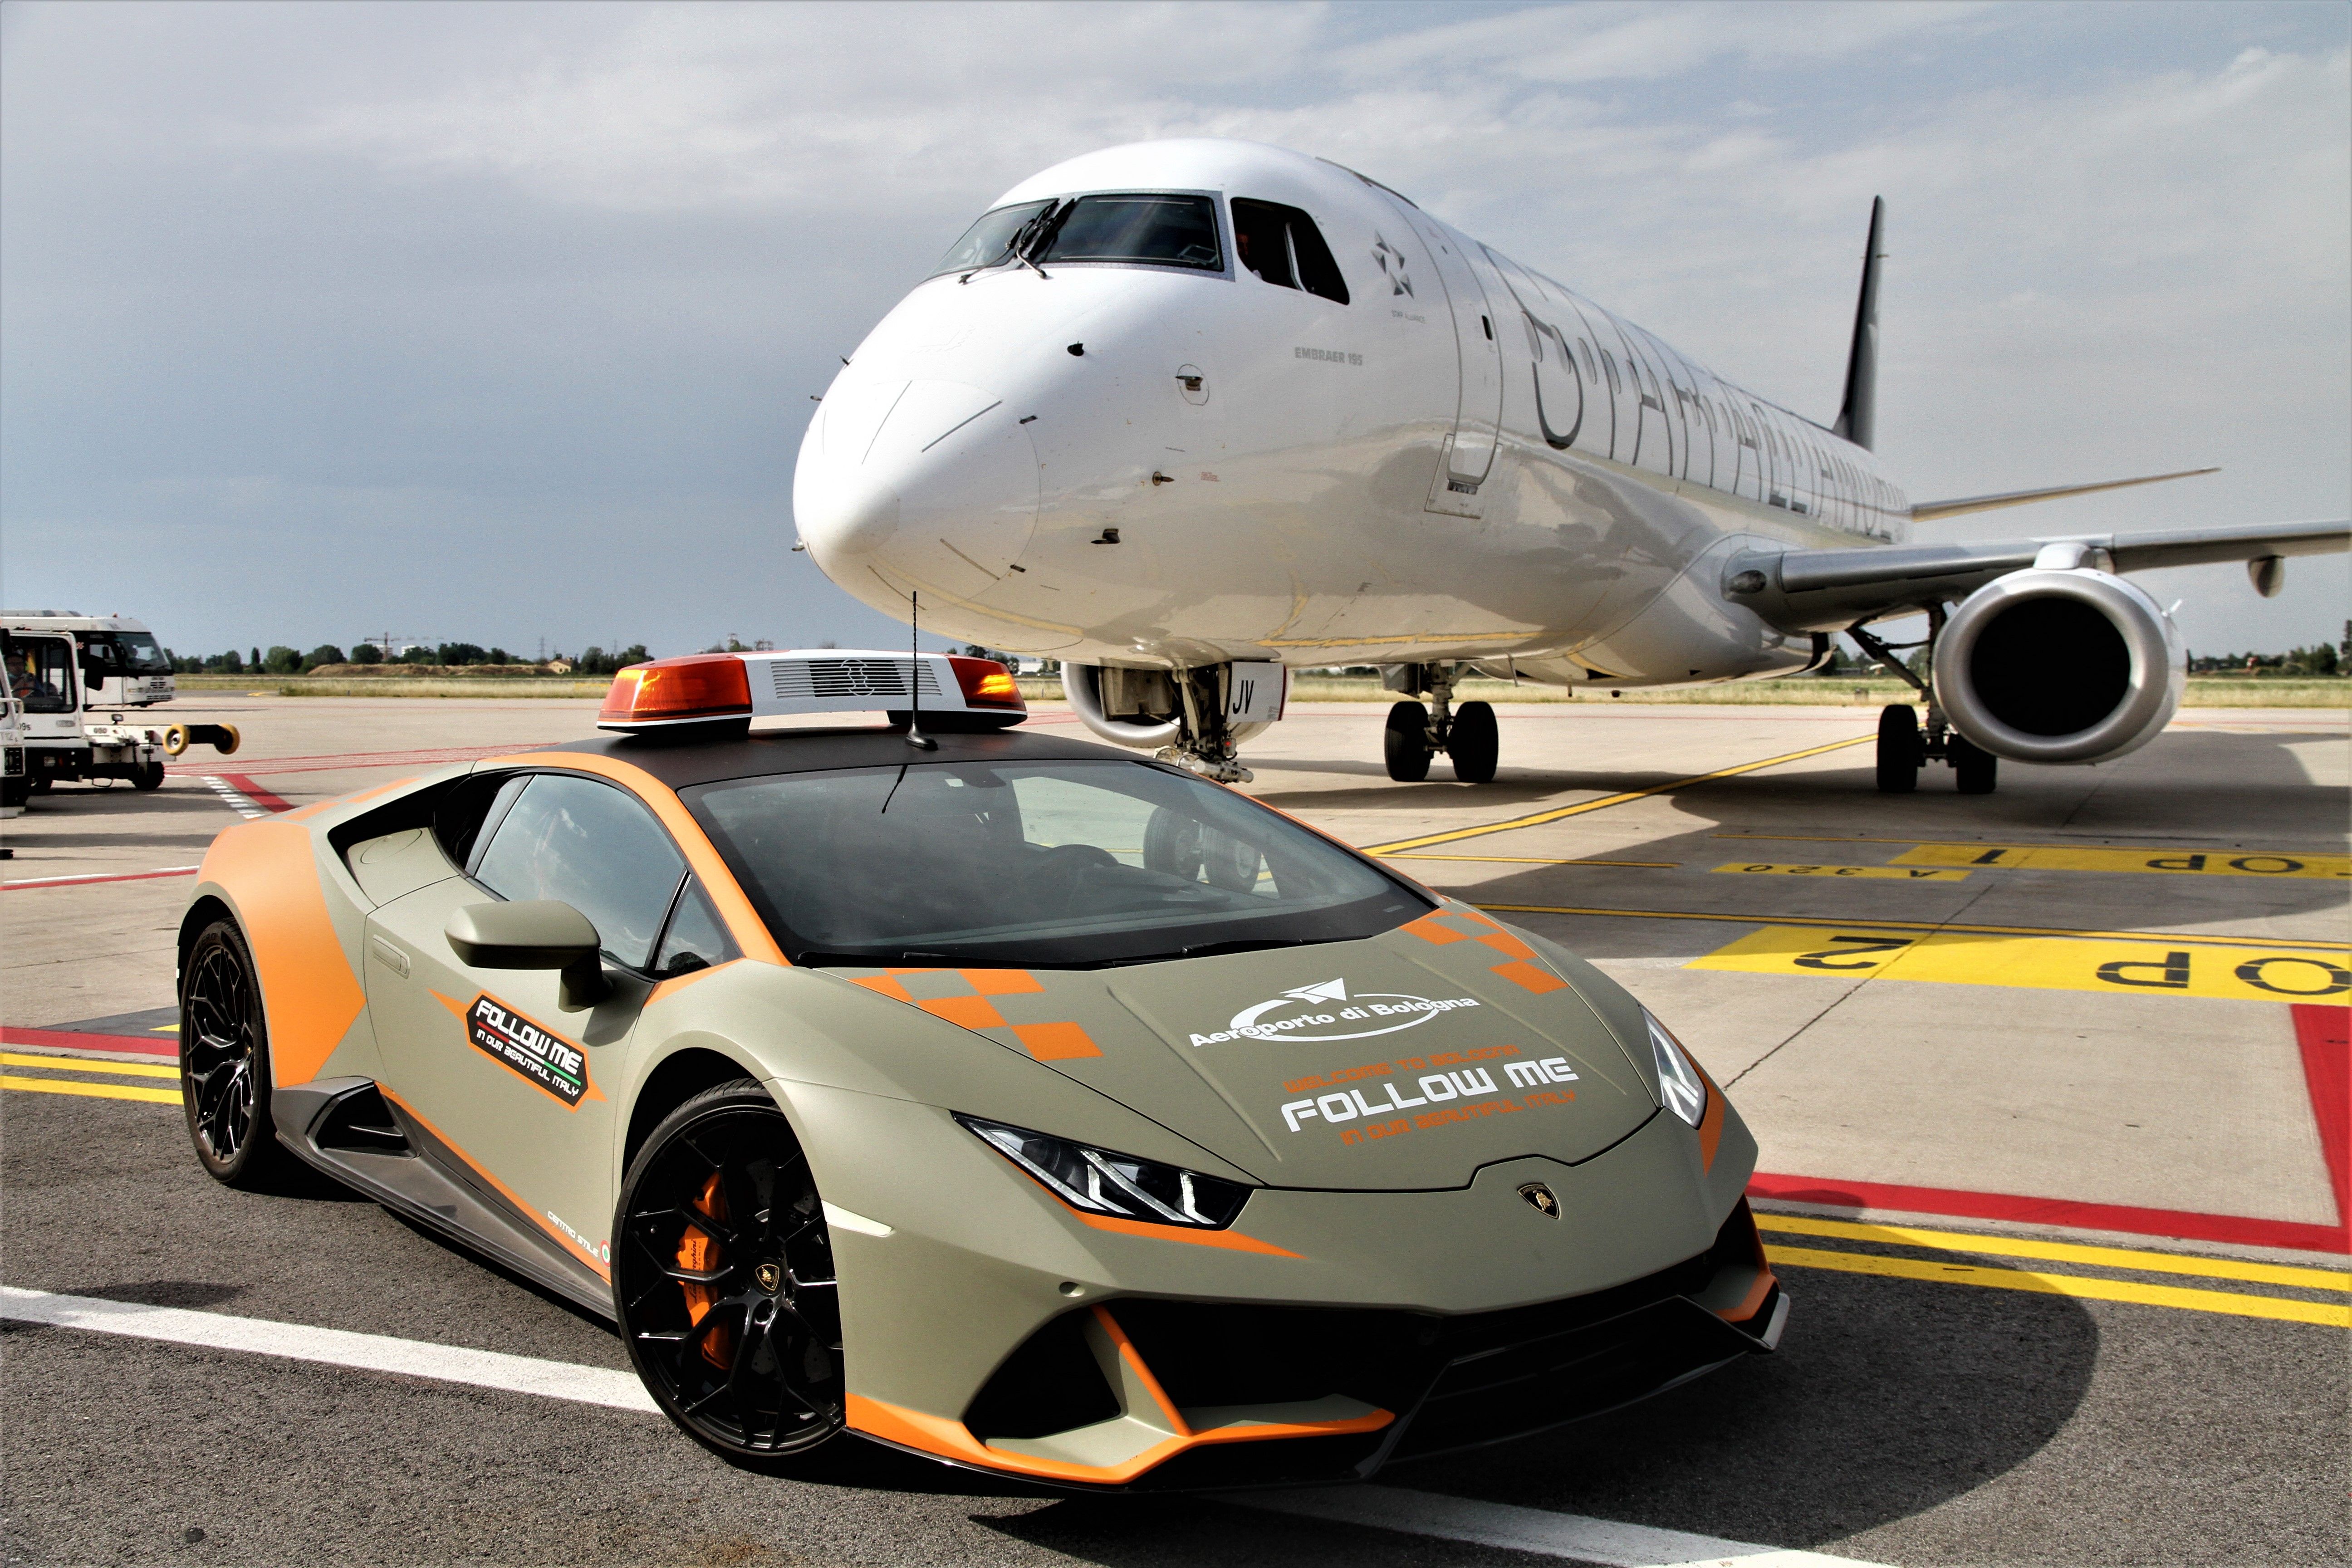 A Lamborghini Huracán Evo Follow Me Car parked in front of a Star Alliance-liveried aircraft.